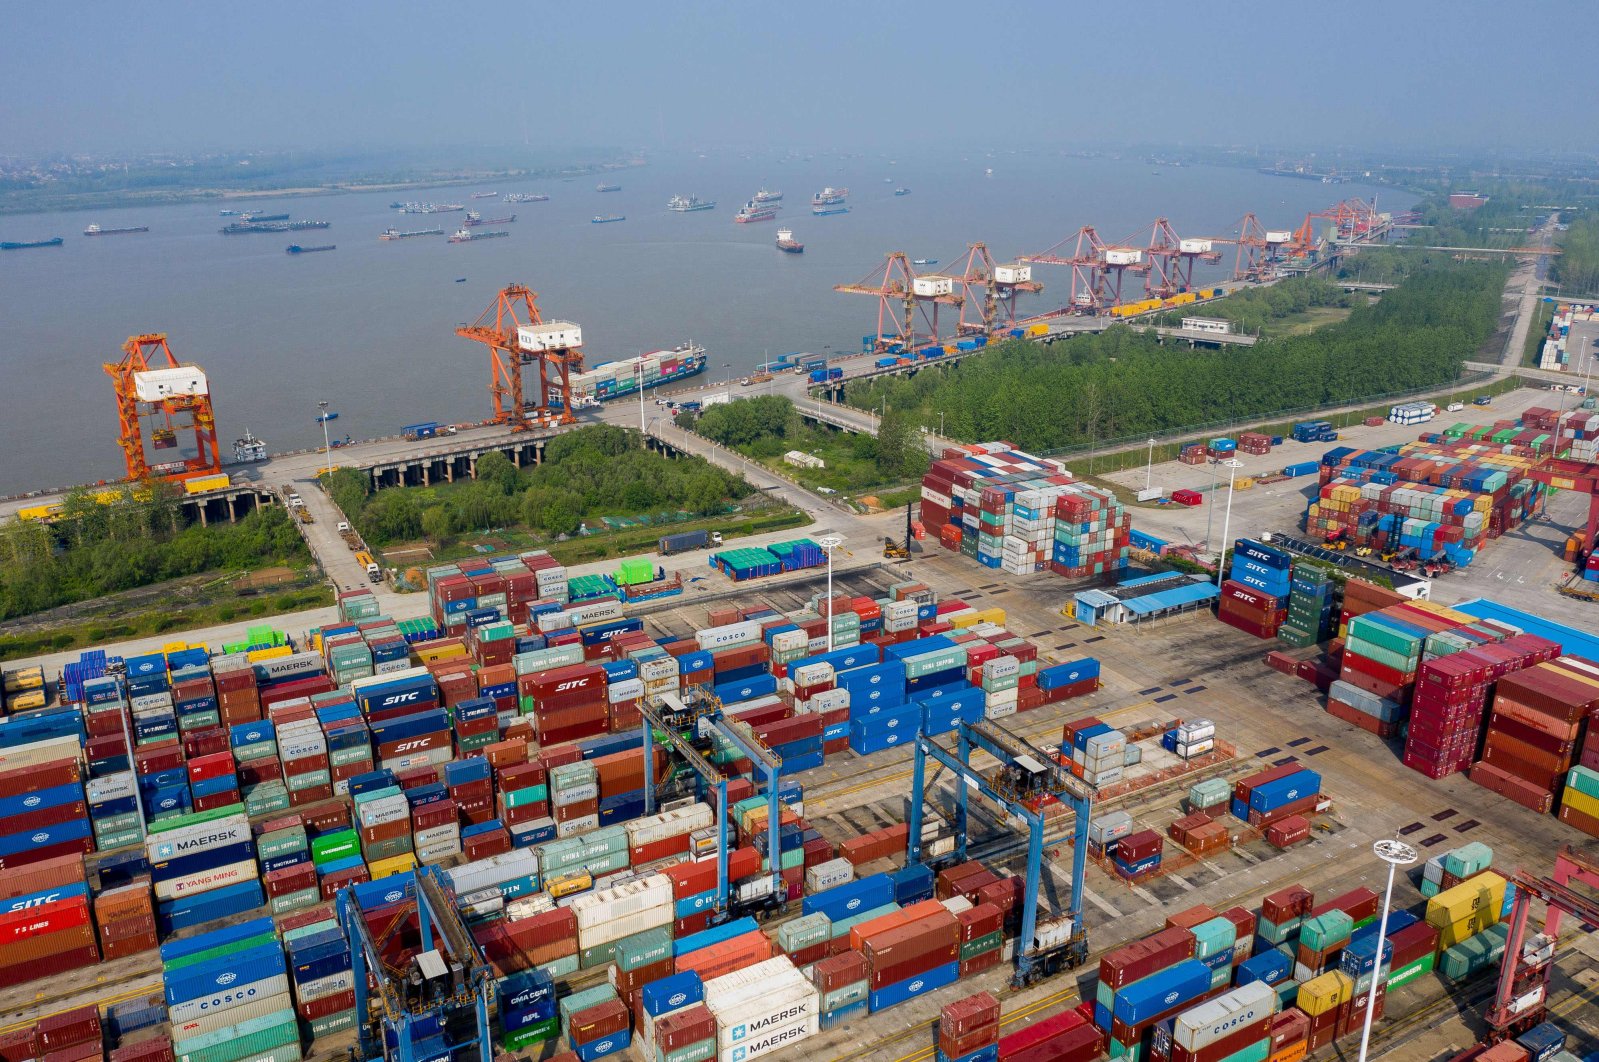 Containers are seen at the port in Wuhan, on the Yangtze river, in China's central Hubei province, April 12, 2020. (AFP Photo)